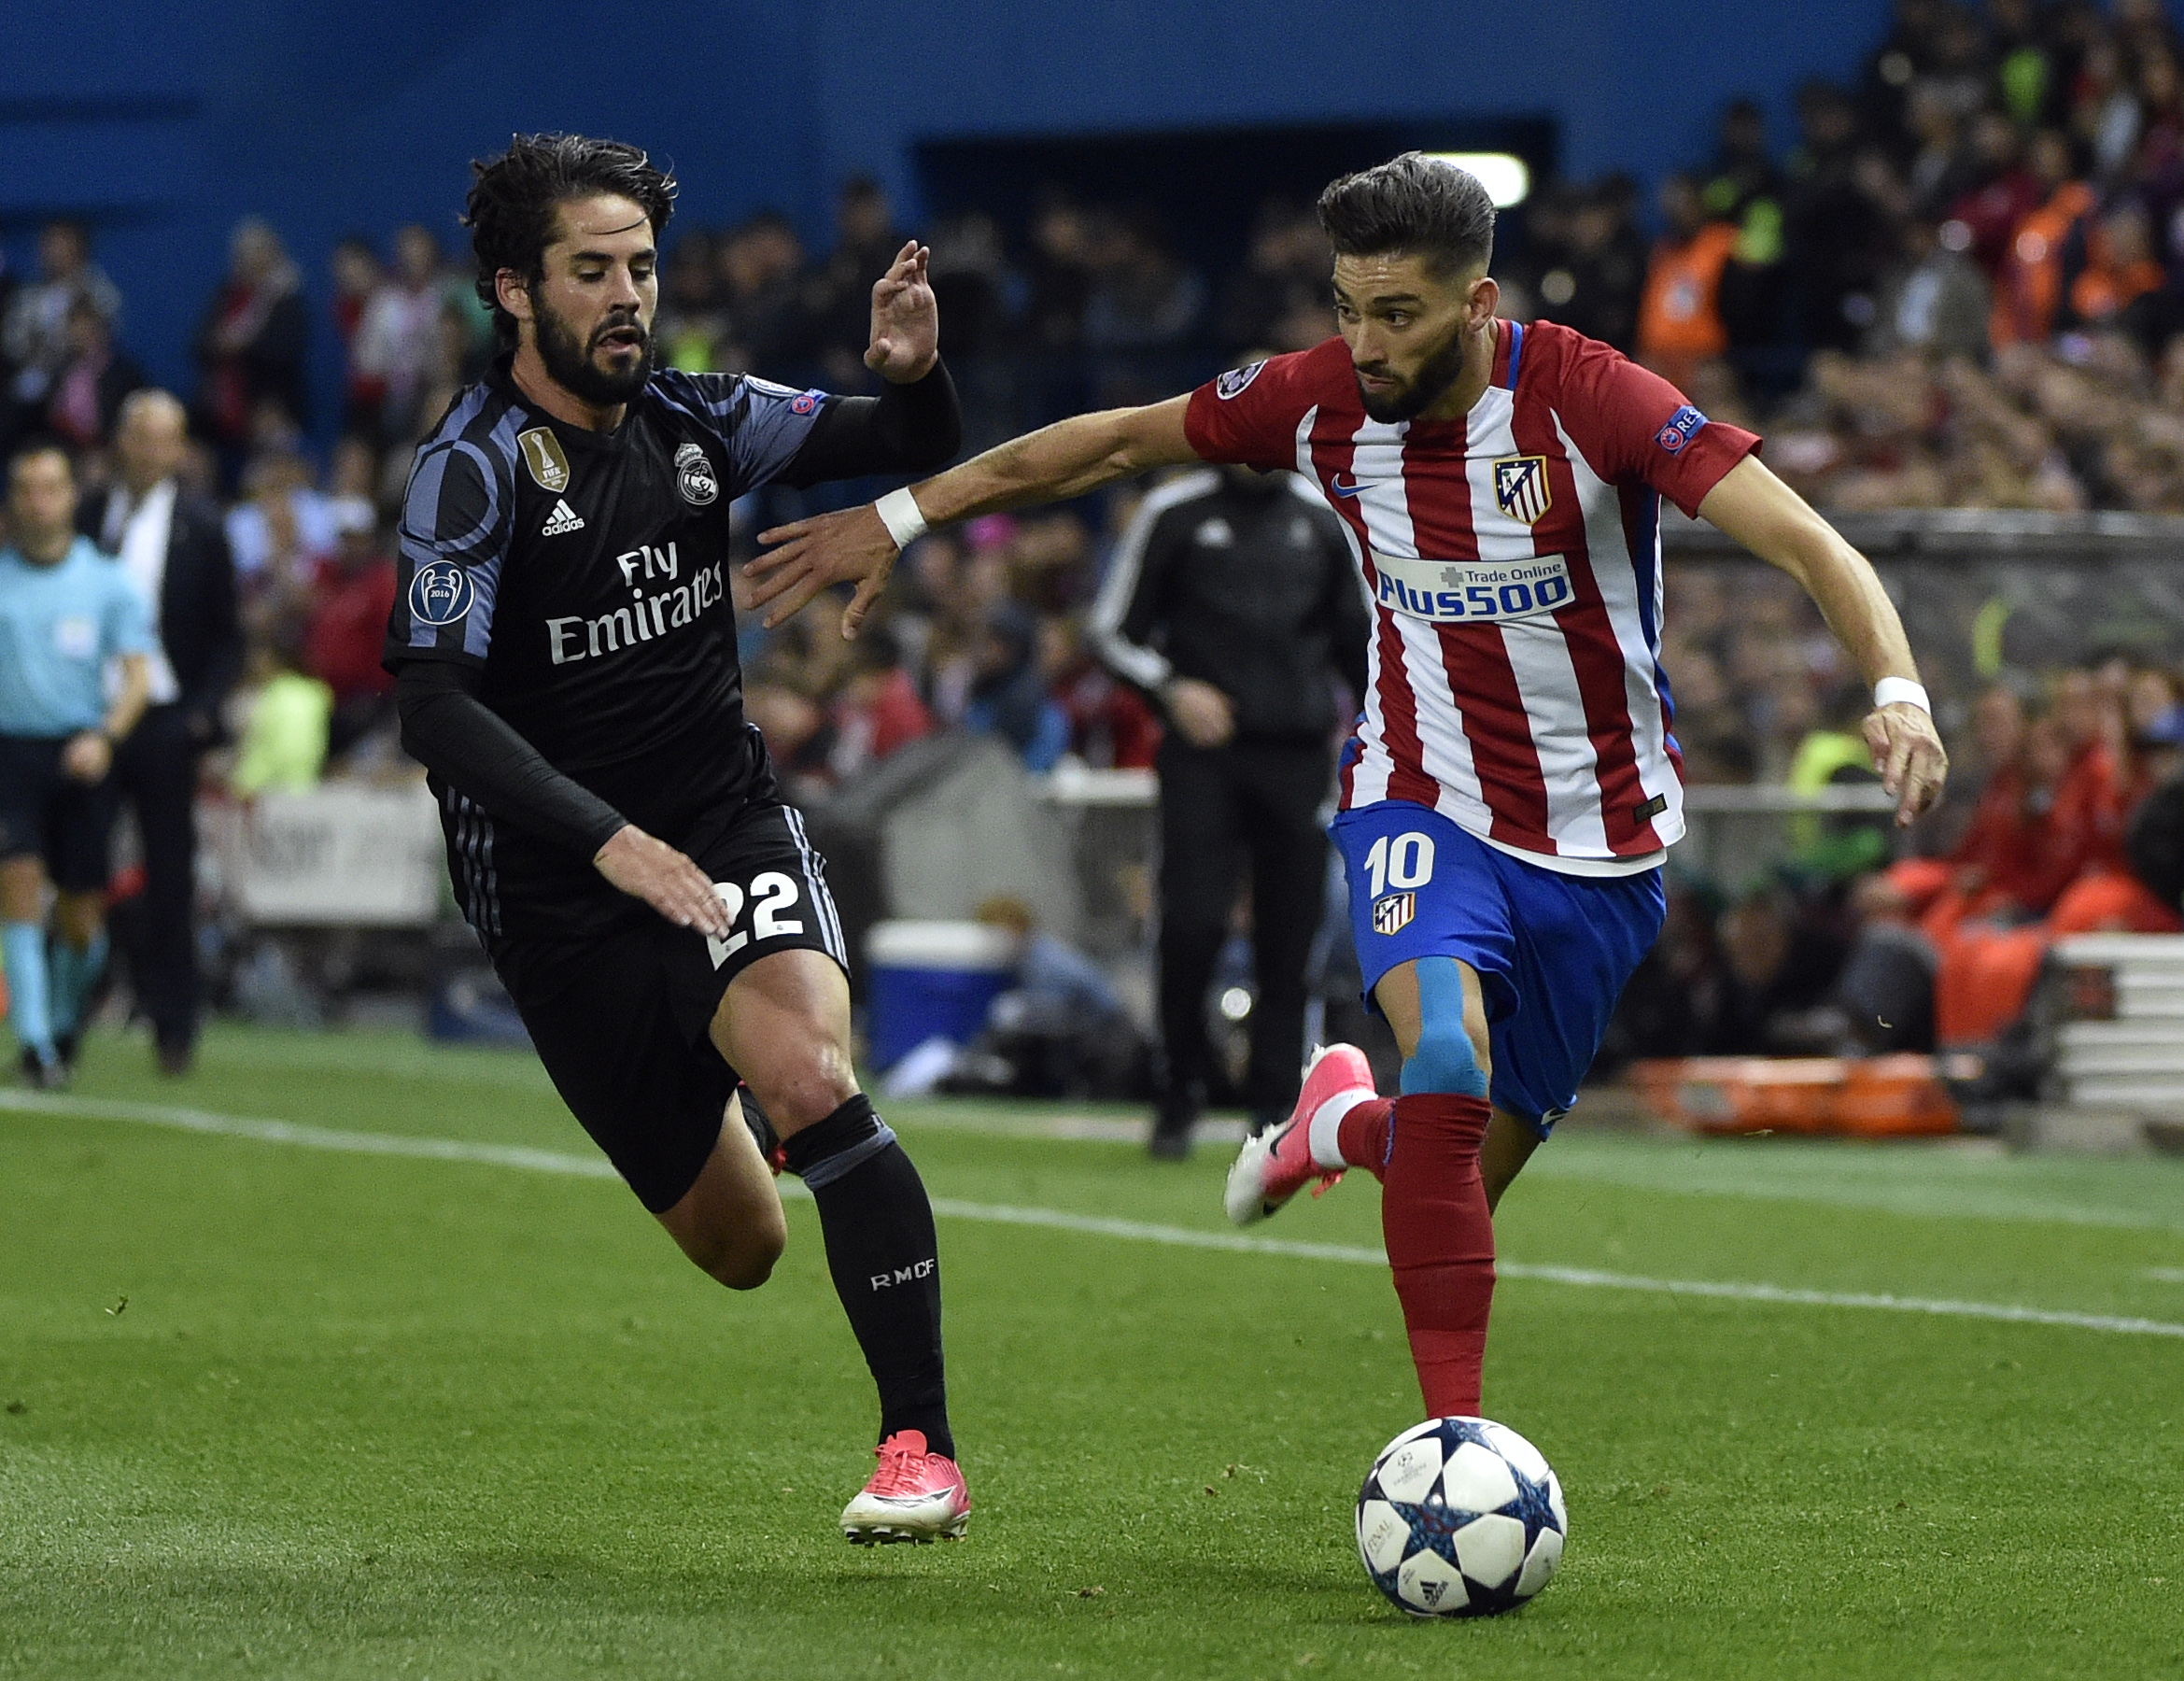 Real Madrid's midfielder Isco (L) vies with Atletico Madrid's Belgian midfielder Yannick Ferreira Carrasco during the UEFA Champions League semifinal second leg football match Club Atletico de Madrid vs Real Madrid CF at the Vicente Calderon stadium in Madrid, on May 10, 2017. / AFP PHOTO / GERARD JULIEN        (Photo credit should read GERARD JULIEN/AFP/Getty Images)